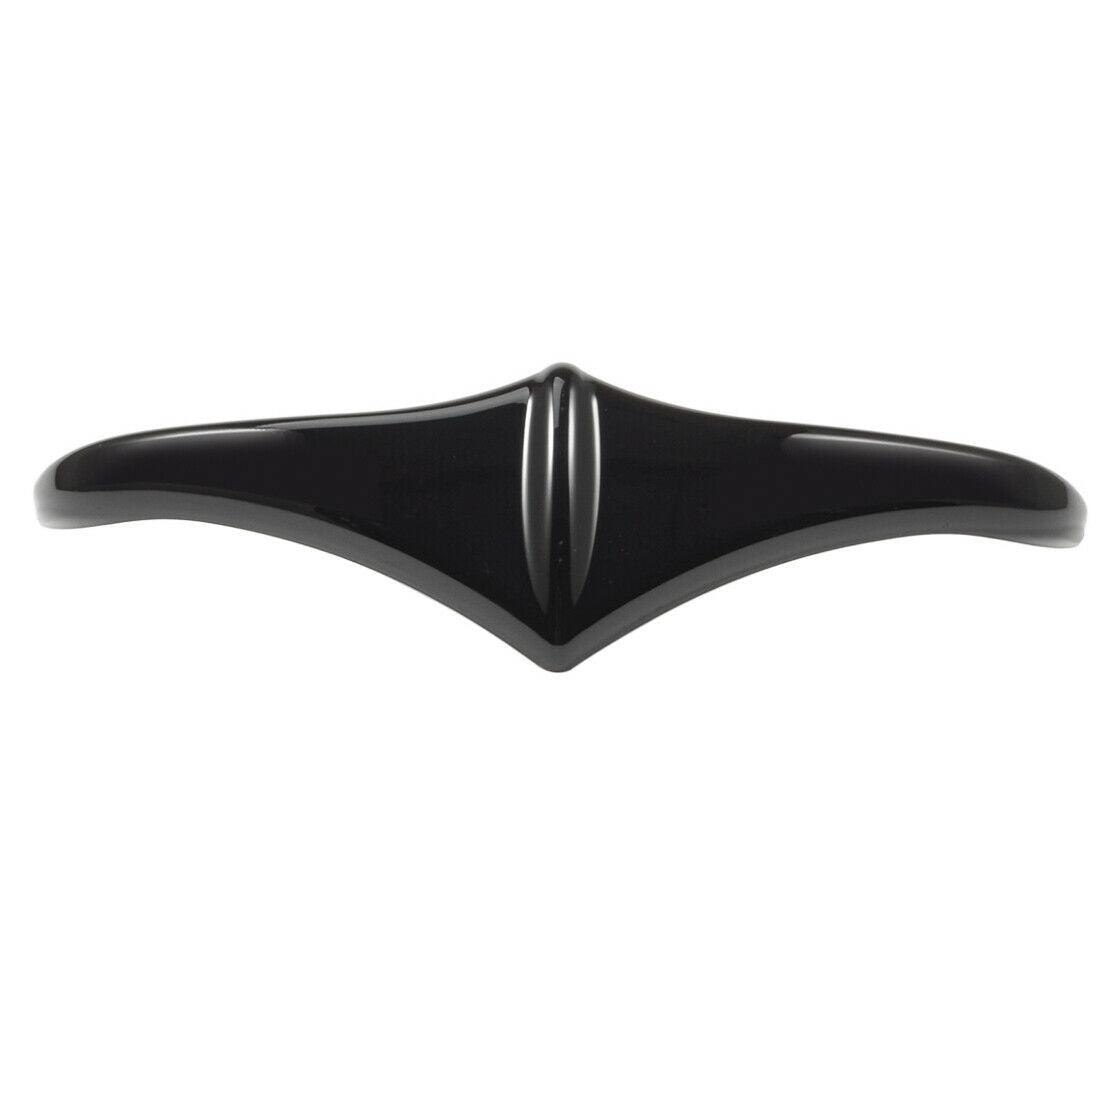 Black Front Fender Accent Edge Tip Trim Fit for Harley Touring Road Glide 98-19 - Moto Life Products